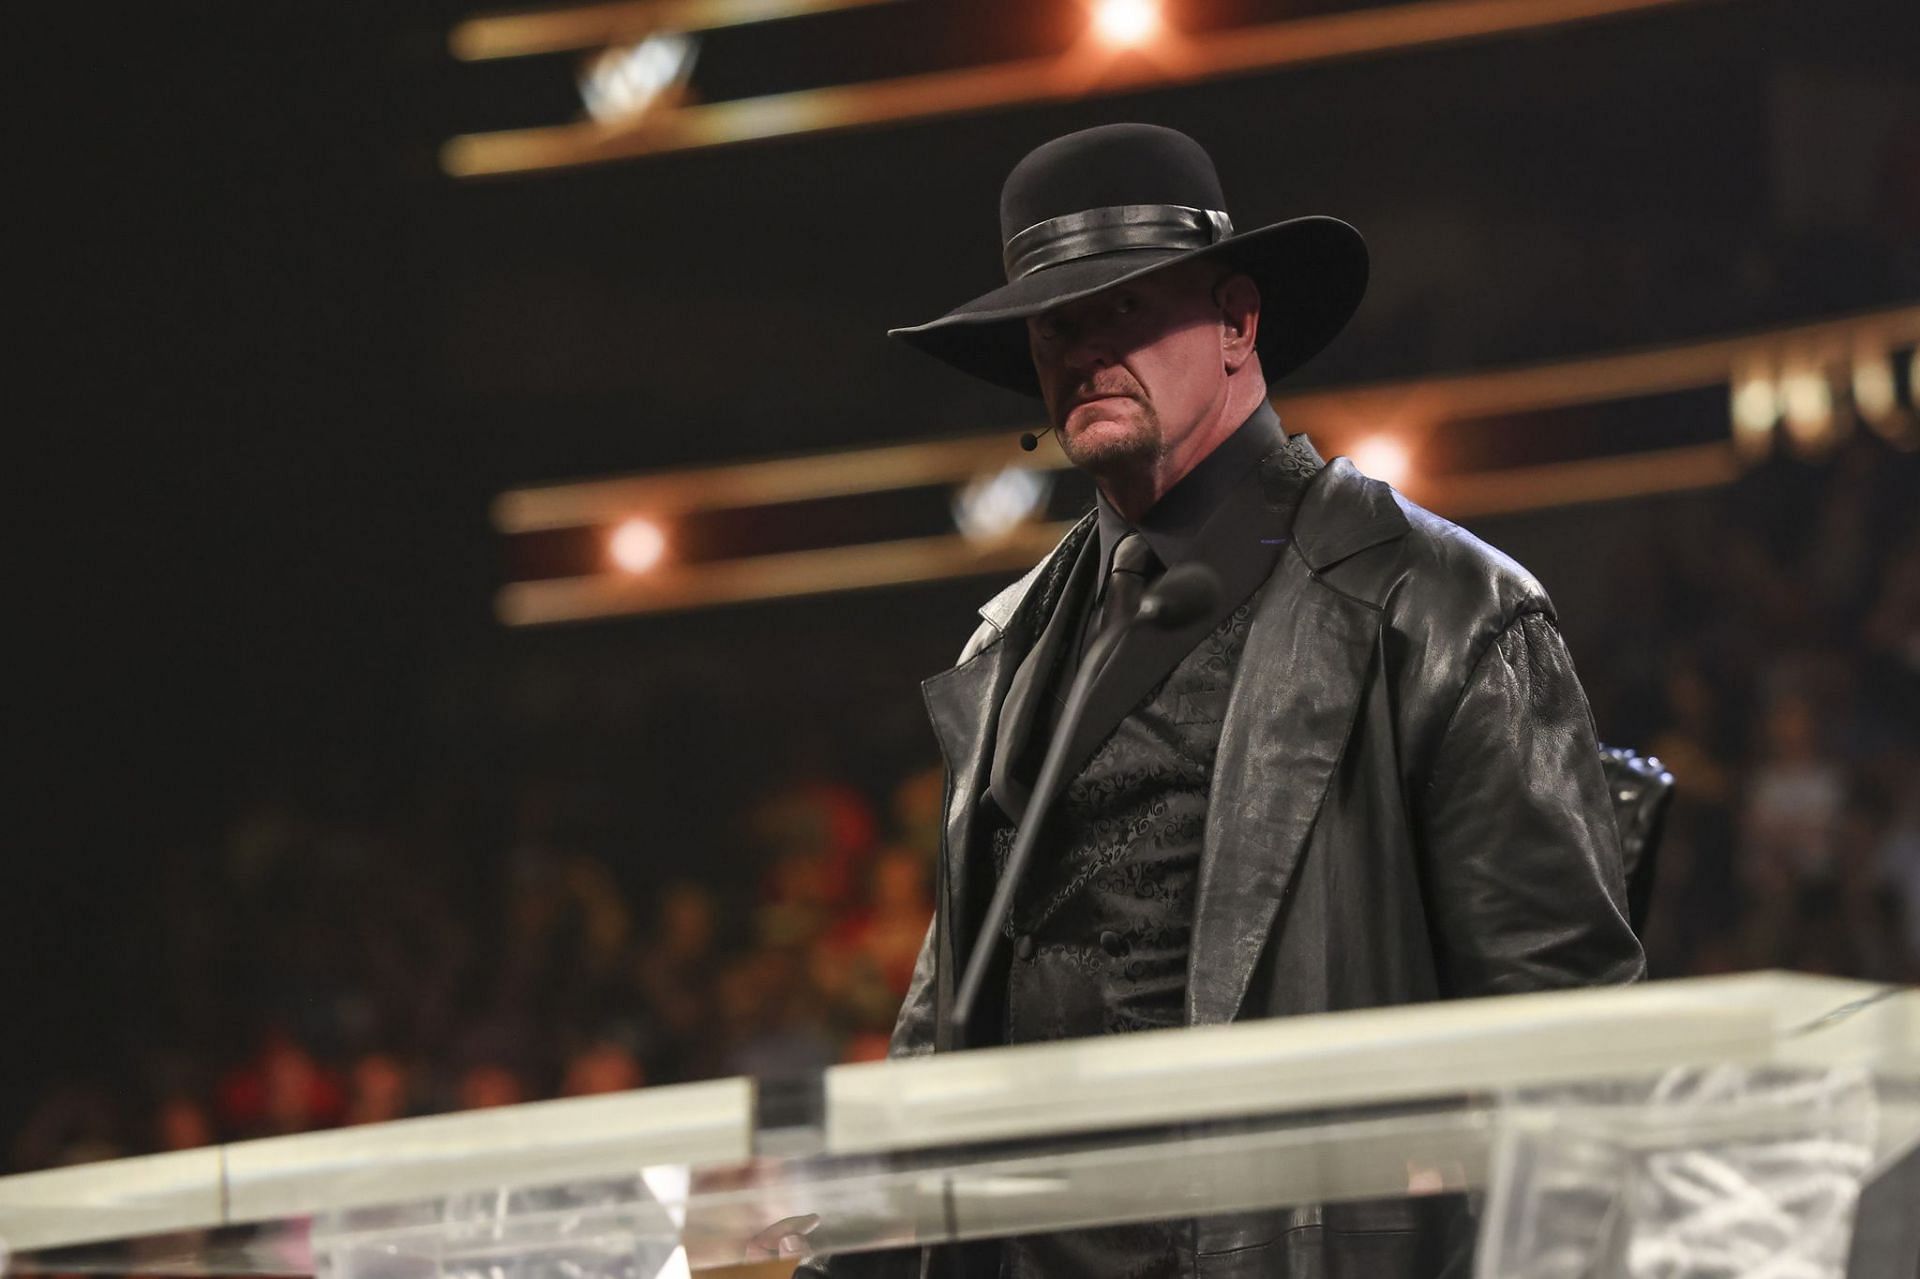 The Undertaker capped off his Hall of Fame speech with an interesting choice of words!